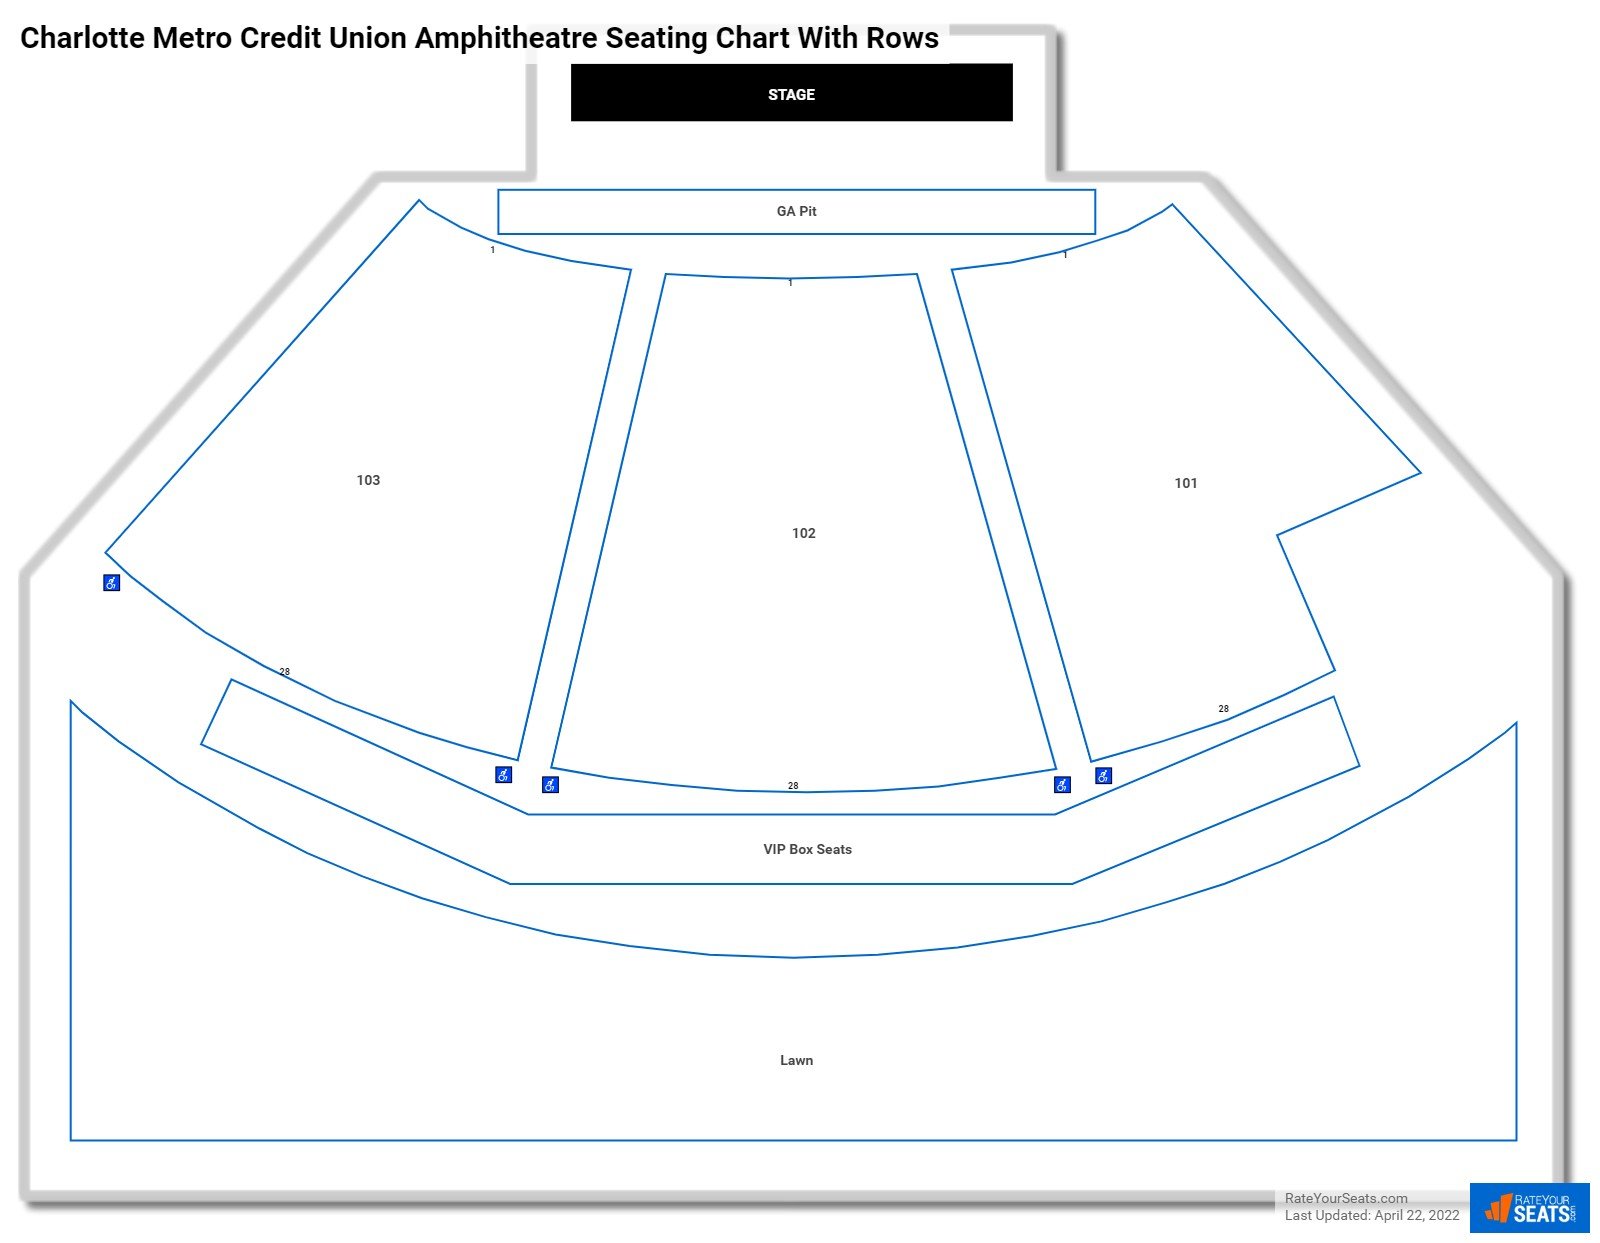 Skyla Credit Union Amphitheatre seating chart with row numbers